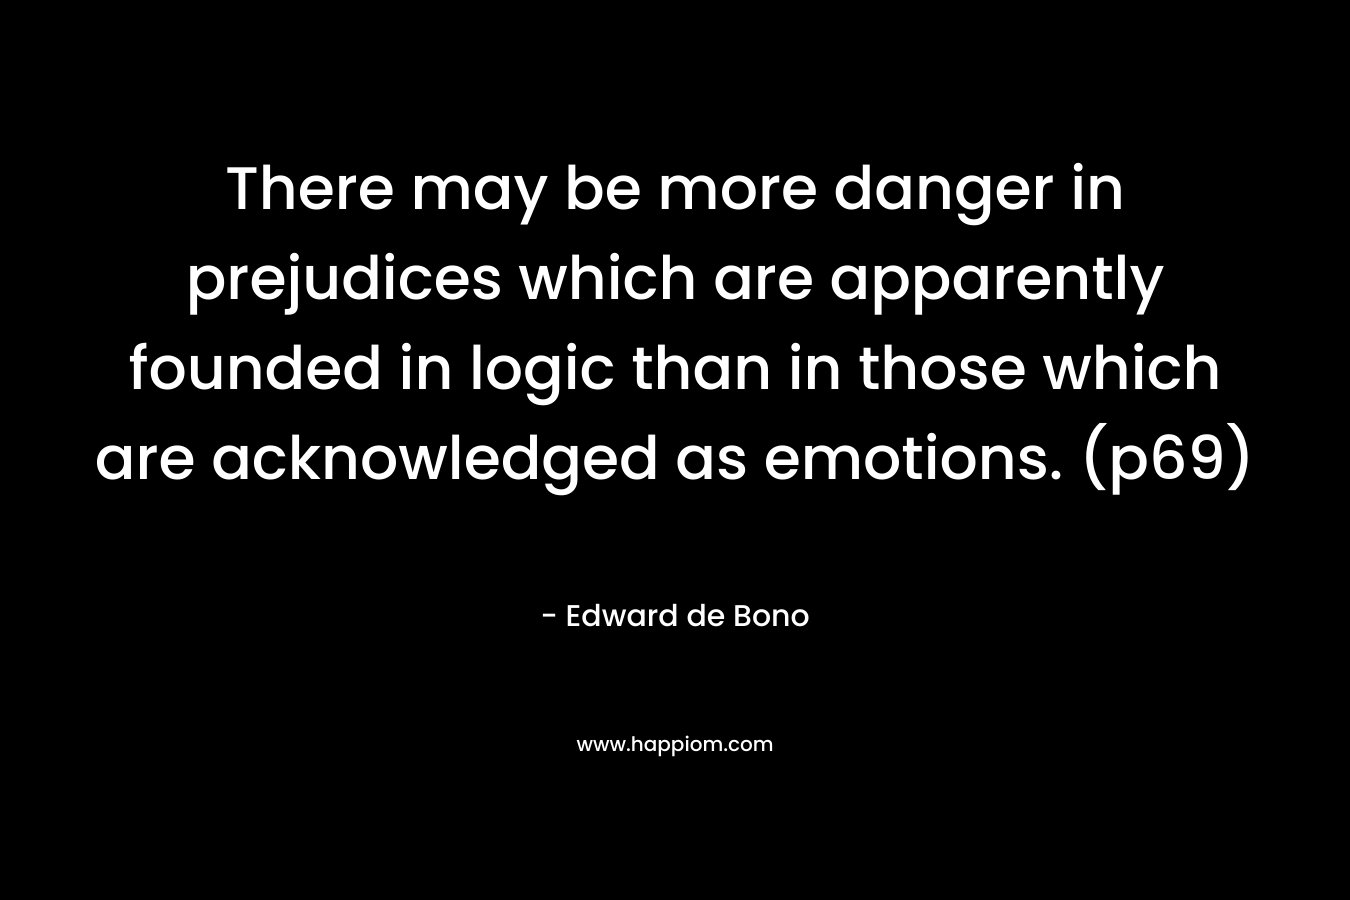 There may be more danger in prejudices which are apparently founded in logic than in those which are acknowledged as emotions. (p69) – Edward de Bono